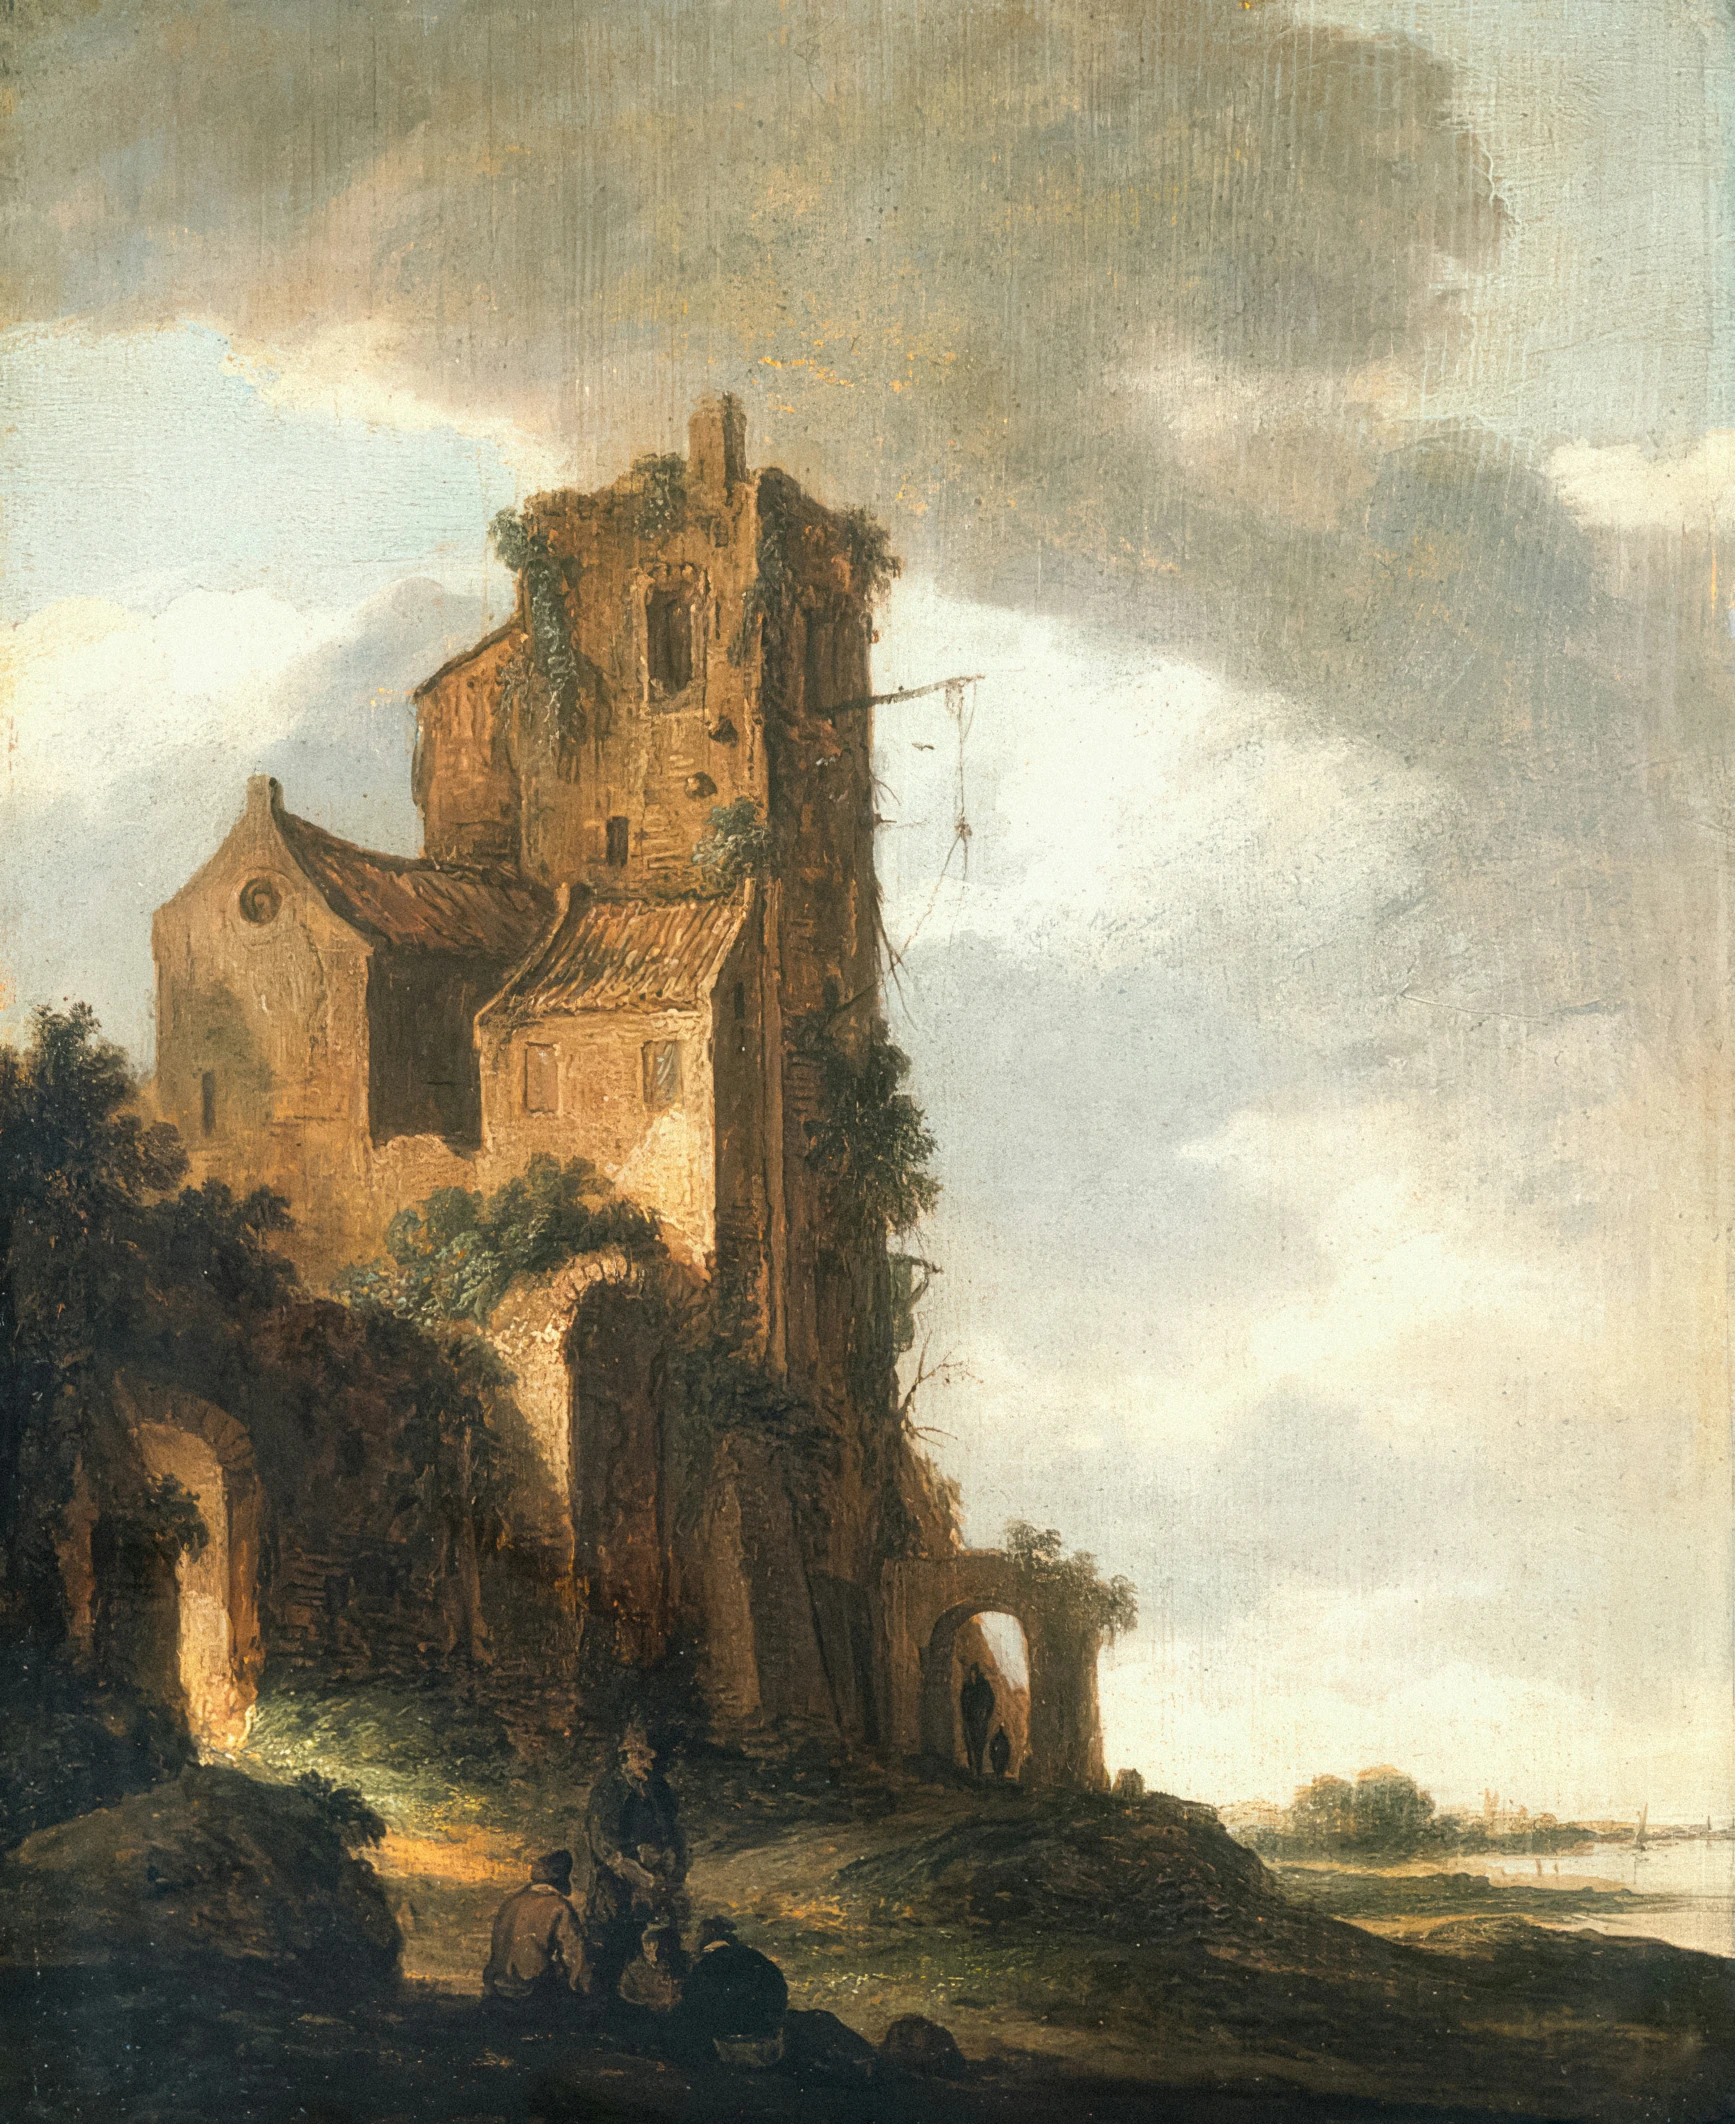 an old painting of an old castle in a landscape